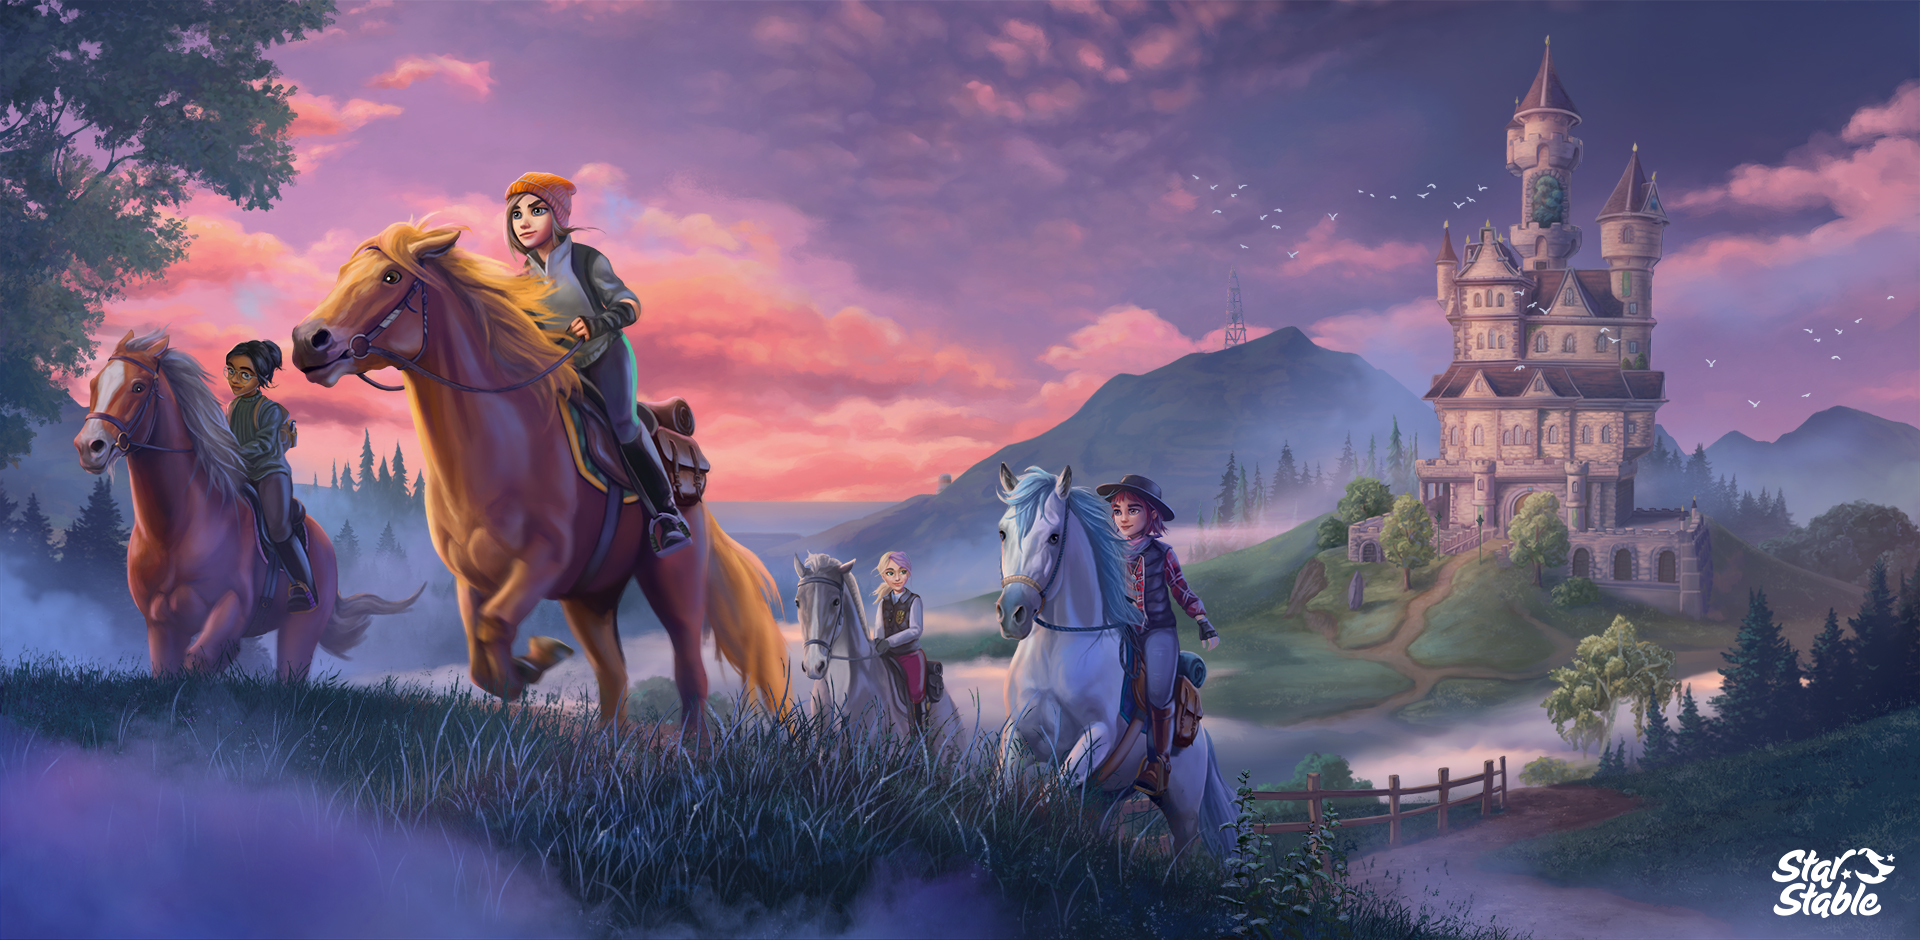 Free desktop wallpapers and backgrounds  Star Stable